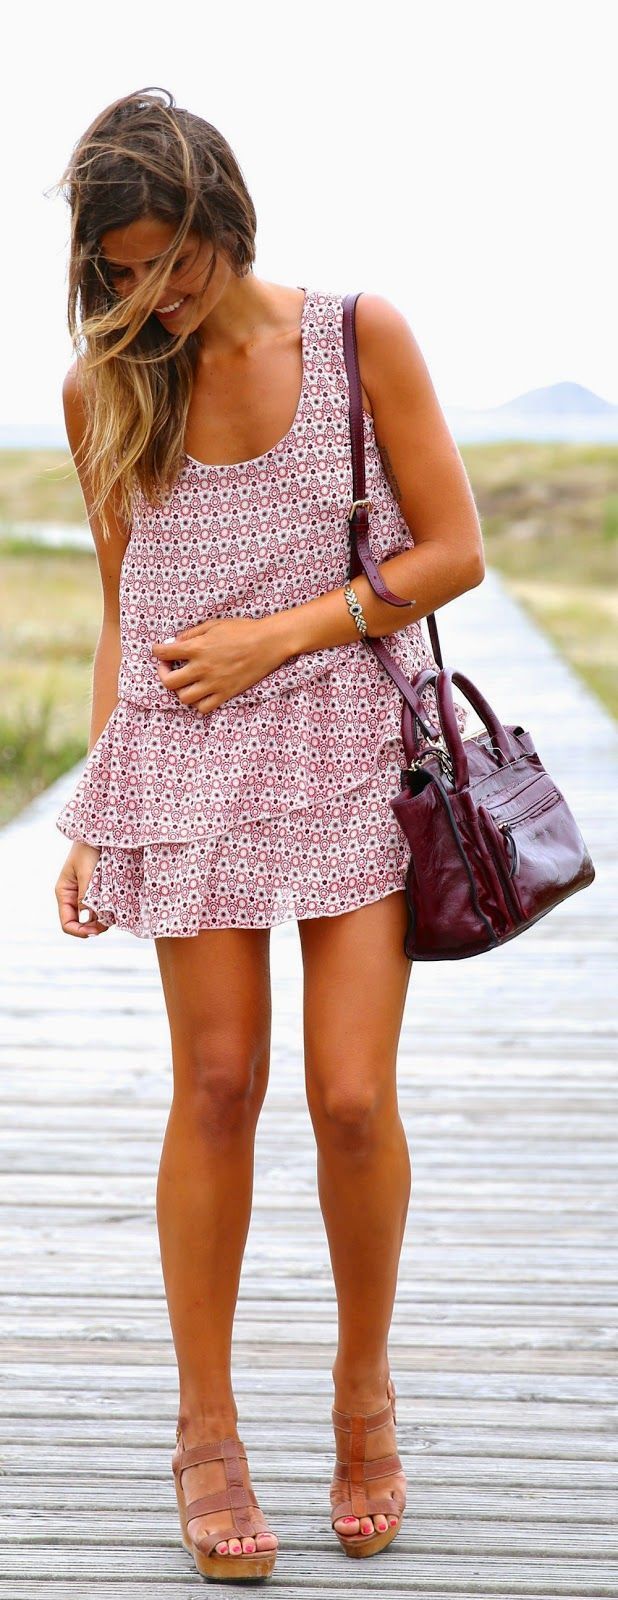 Fashion trends | Summer stylish patterned mini dress, strapped sandals ...